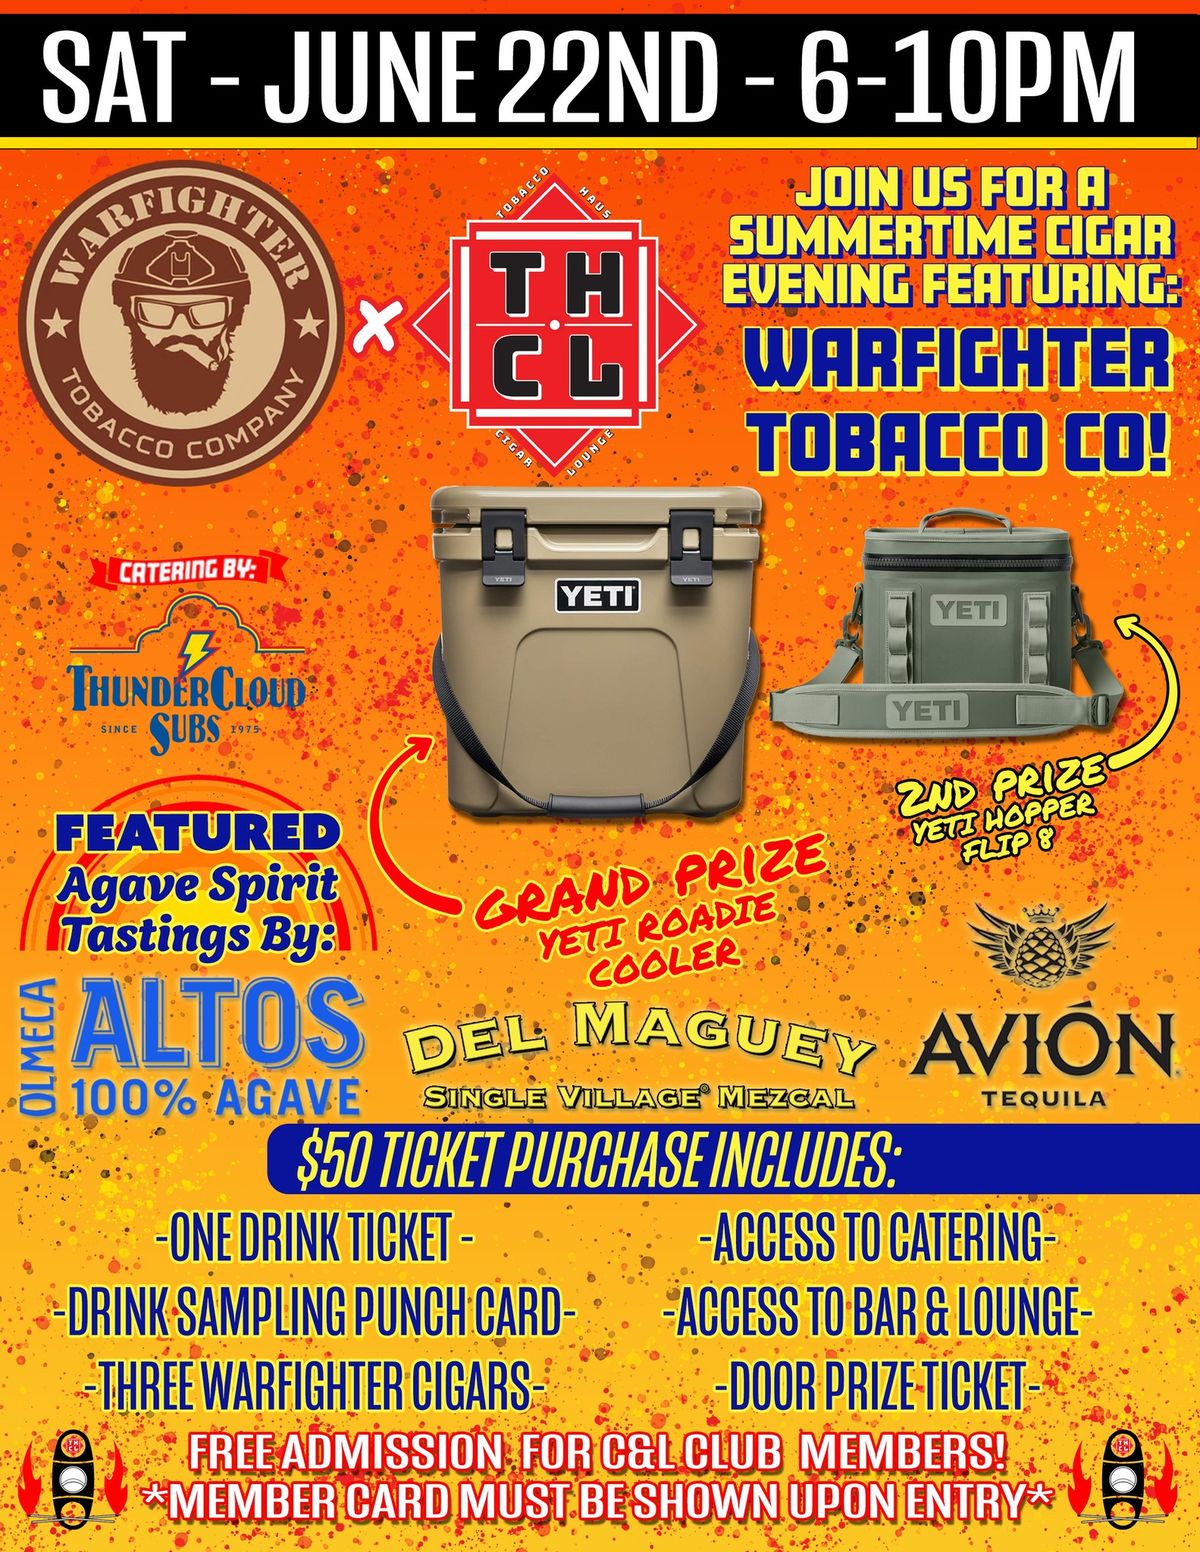 Summertime Event With Warfighter Tobacco Co, Altos Tequila, Del Maguey Mezcal, and Avion Tequila!